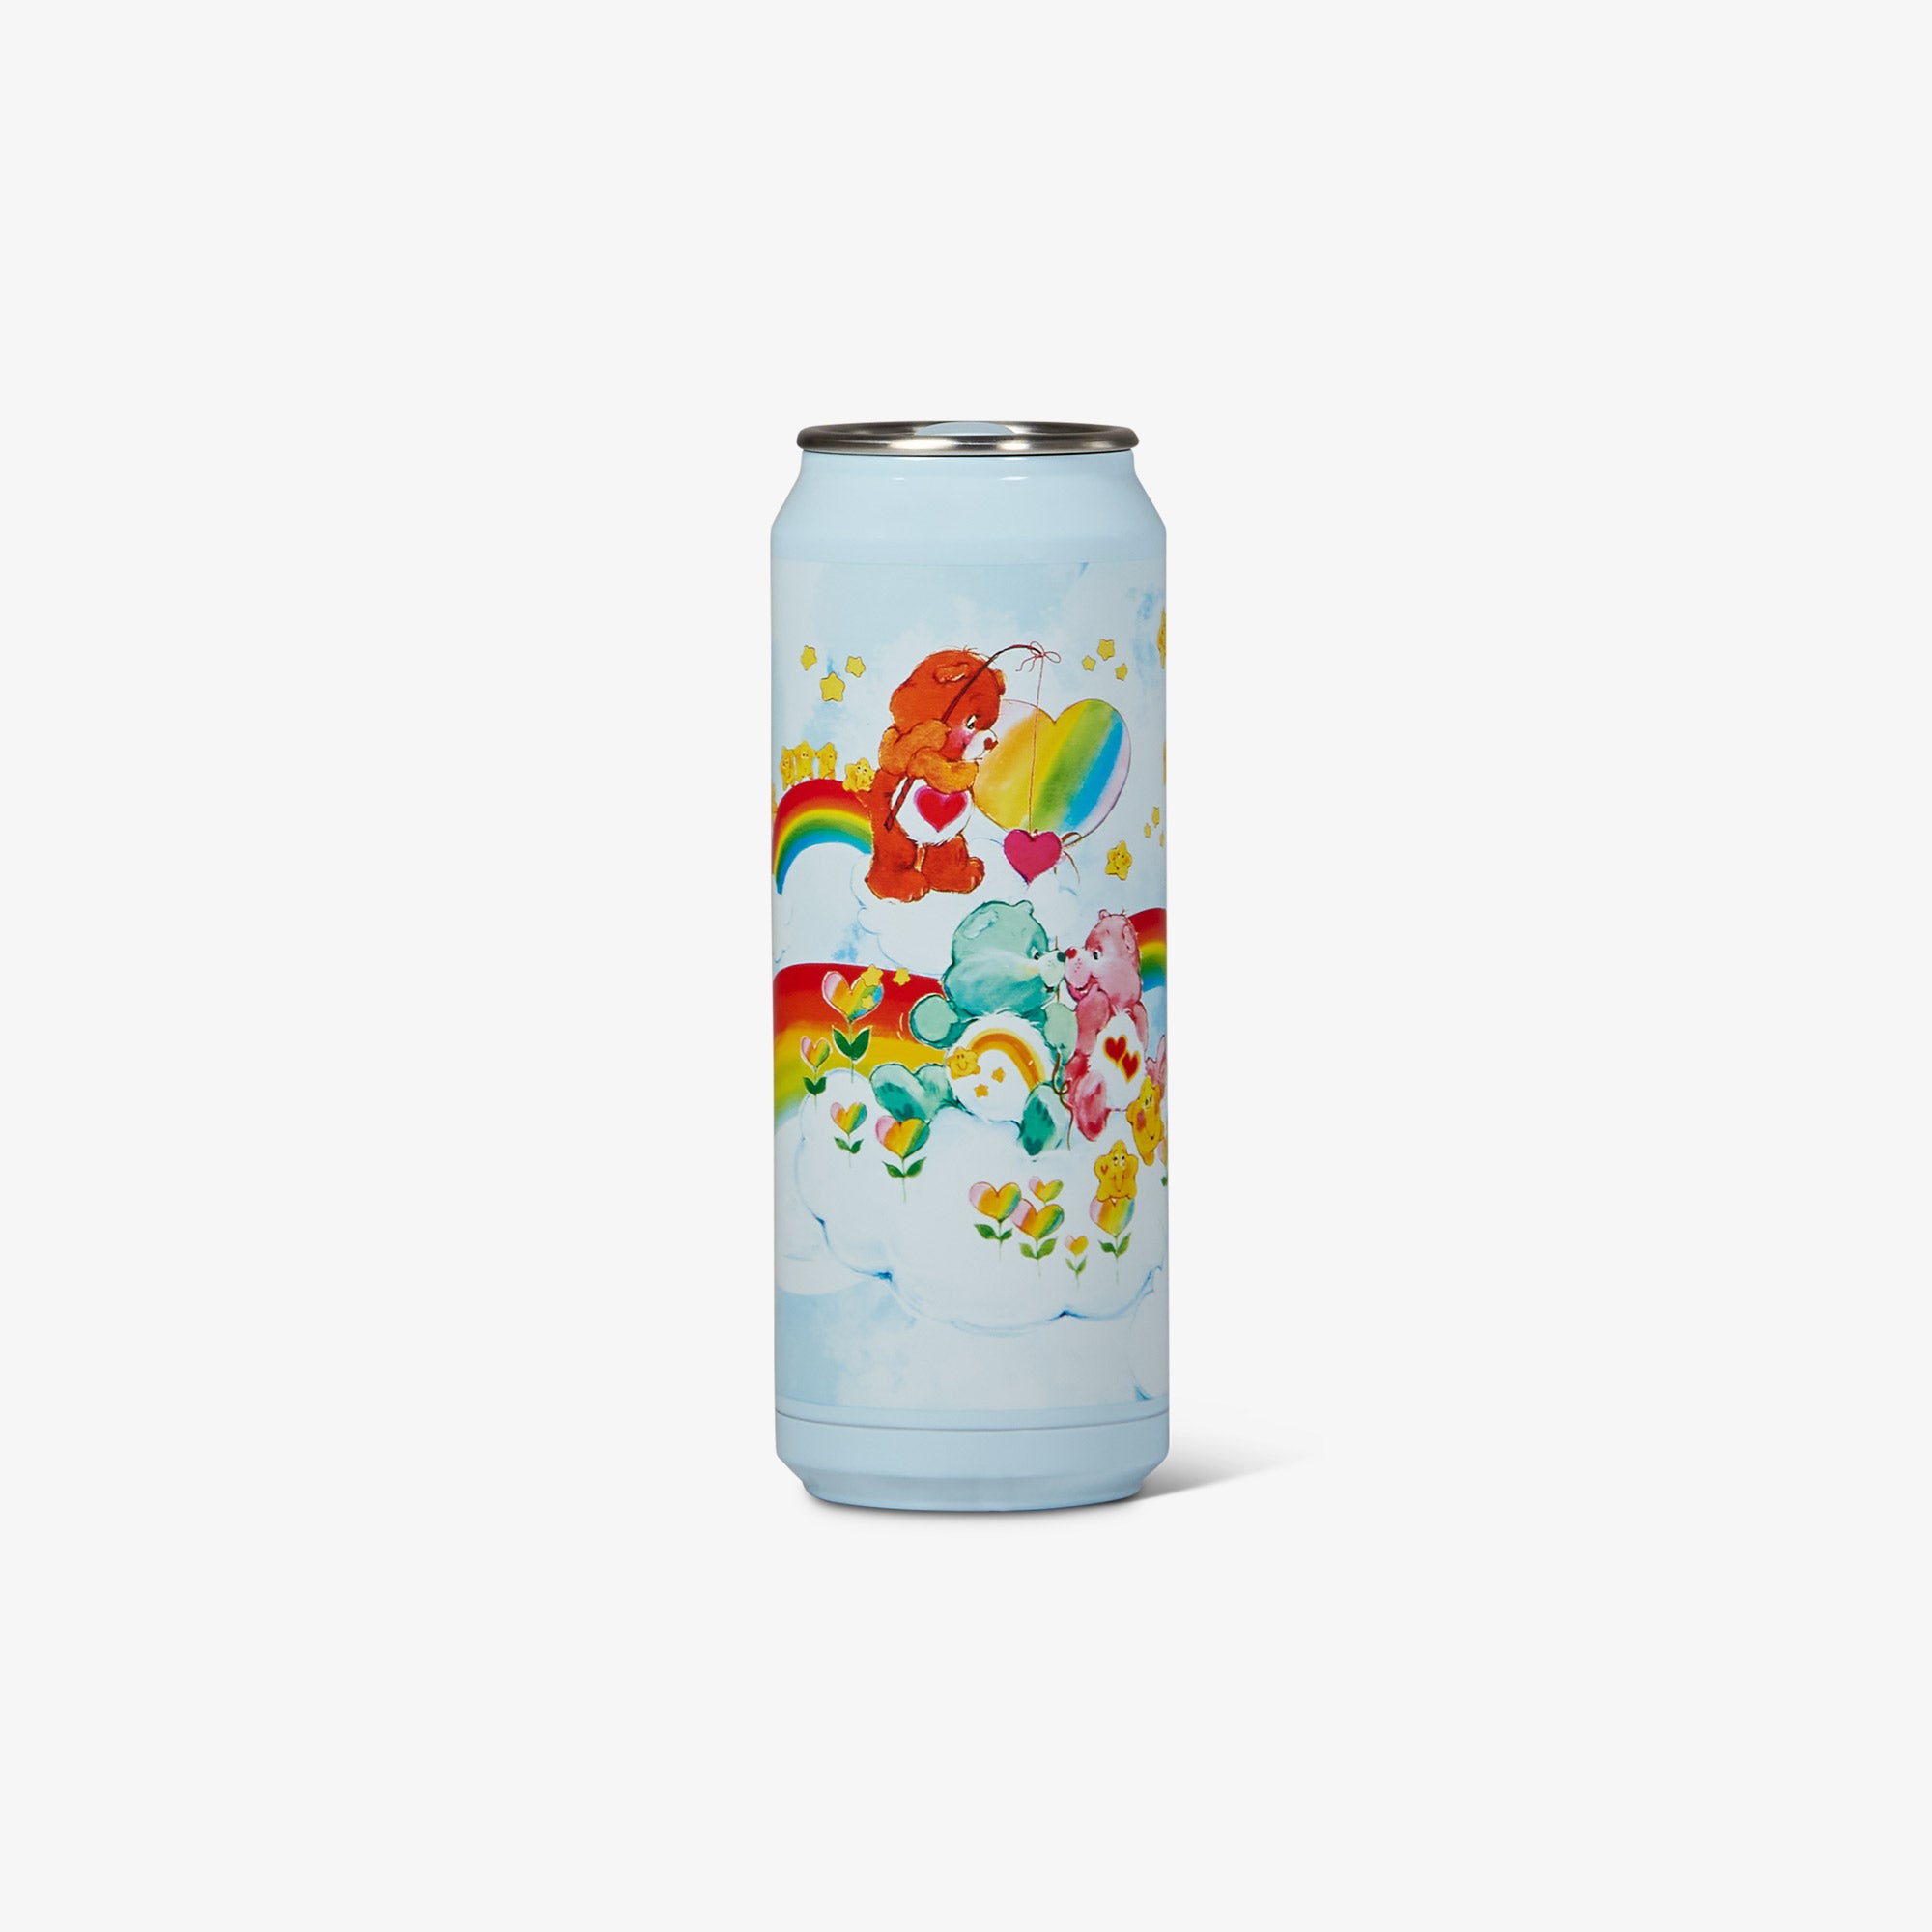 Rainbow Clouds - 20 Oz Stainless Steel Tumbler with Lid Vacuum